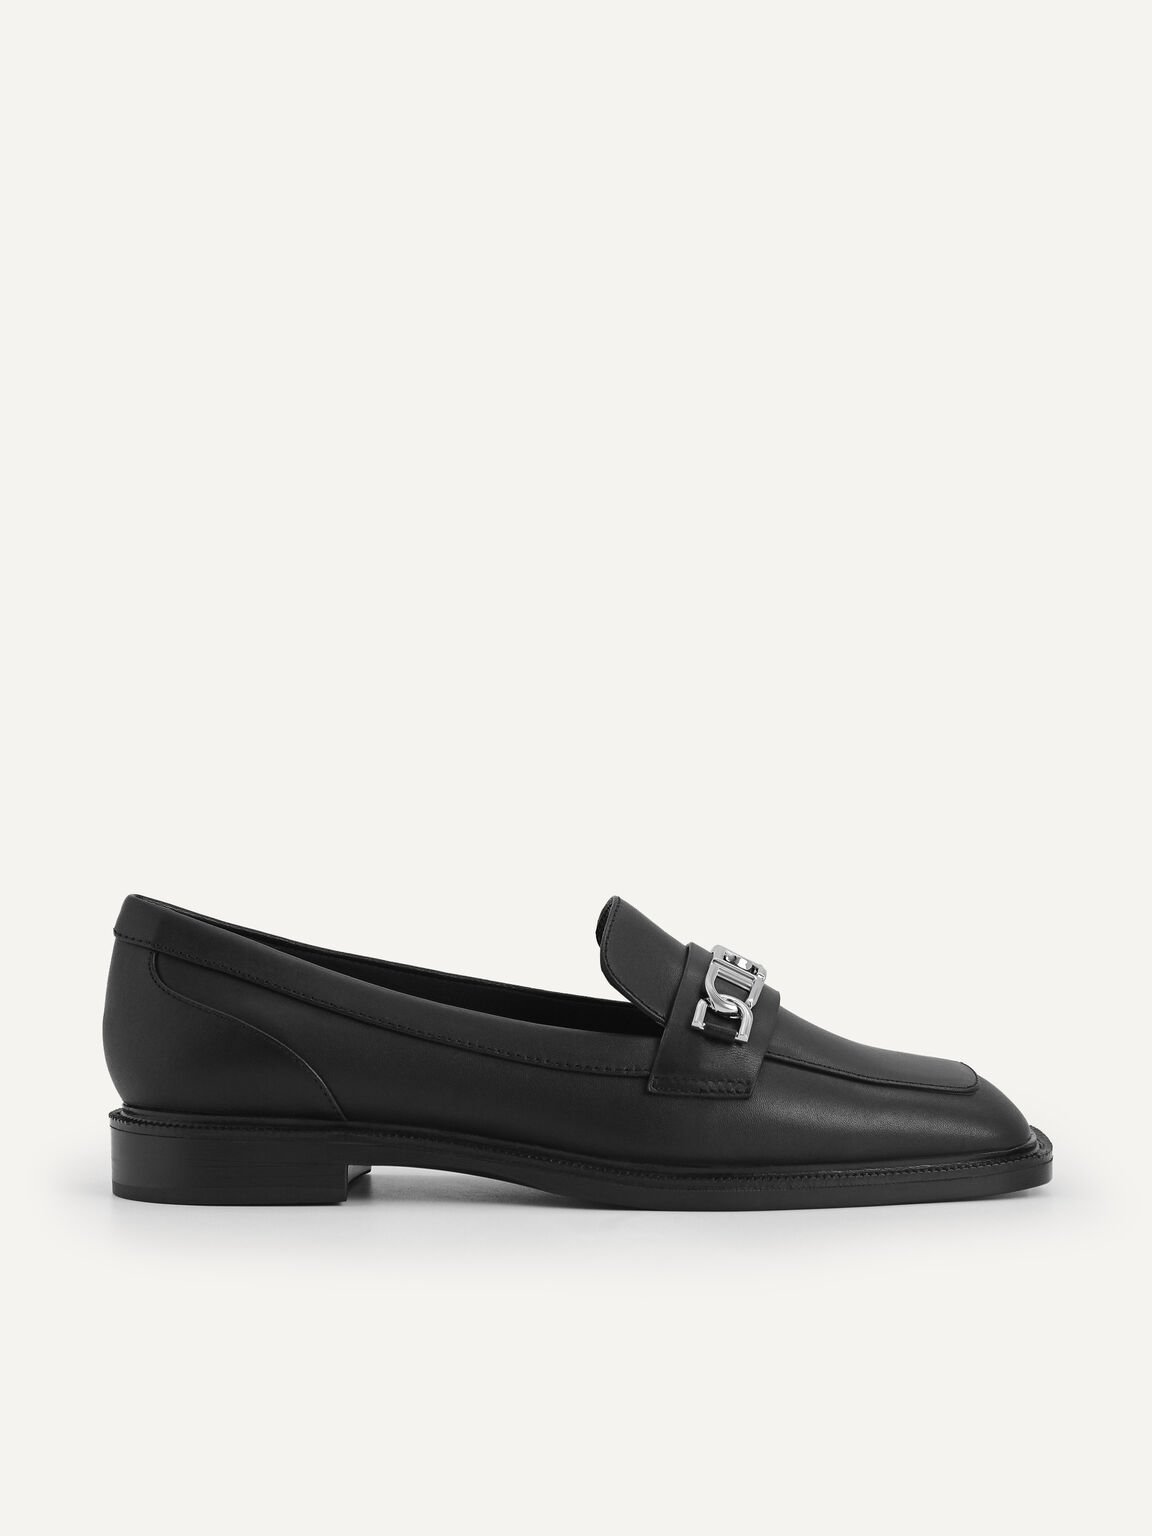 Icon Leather Square Toe Loafers, Black, hi-res